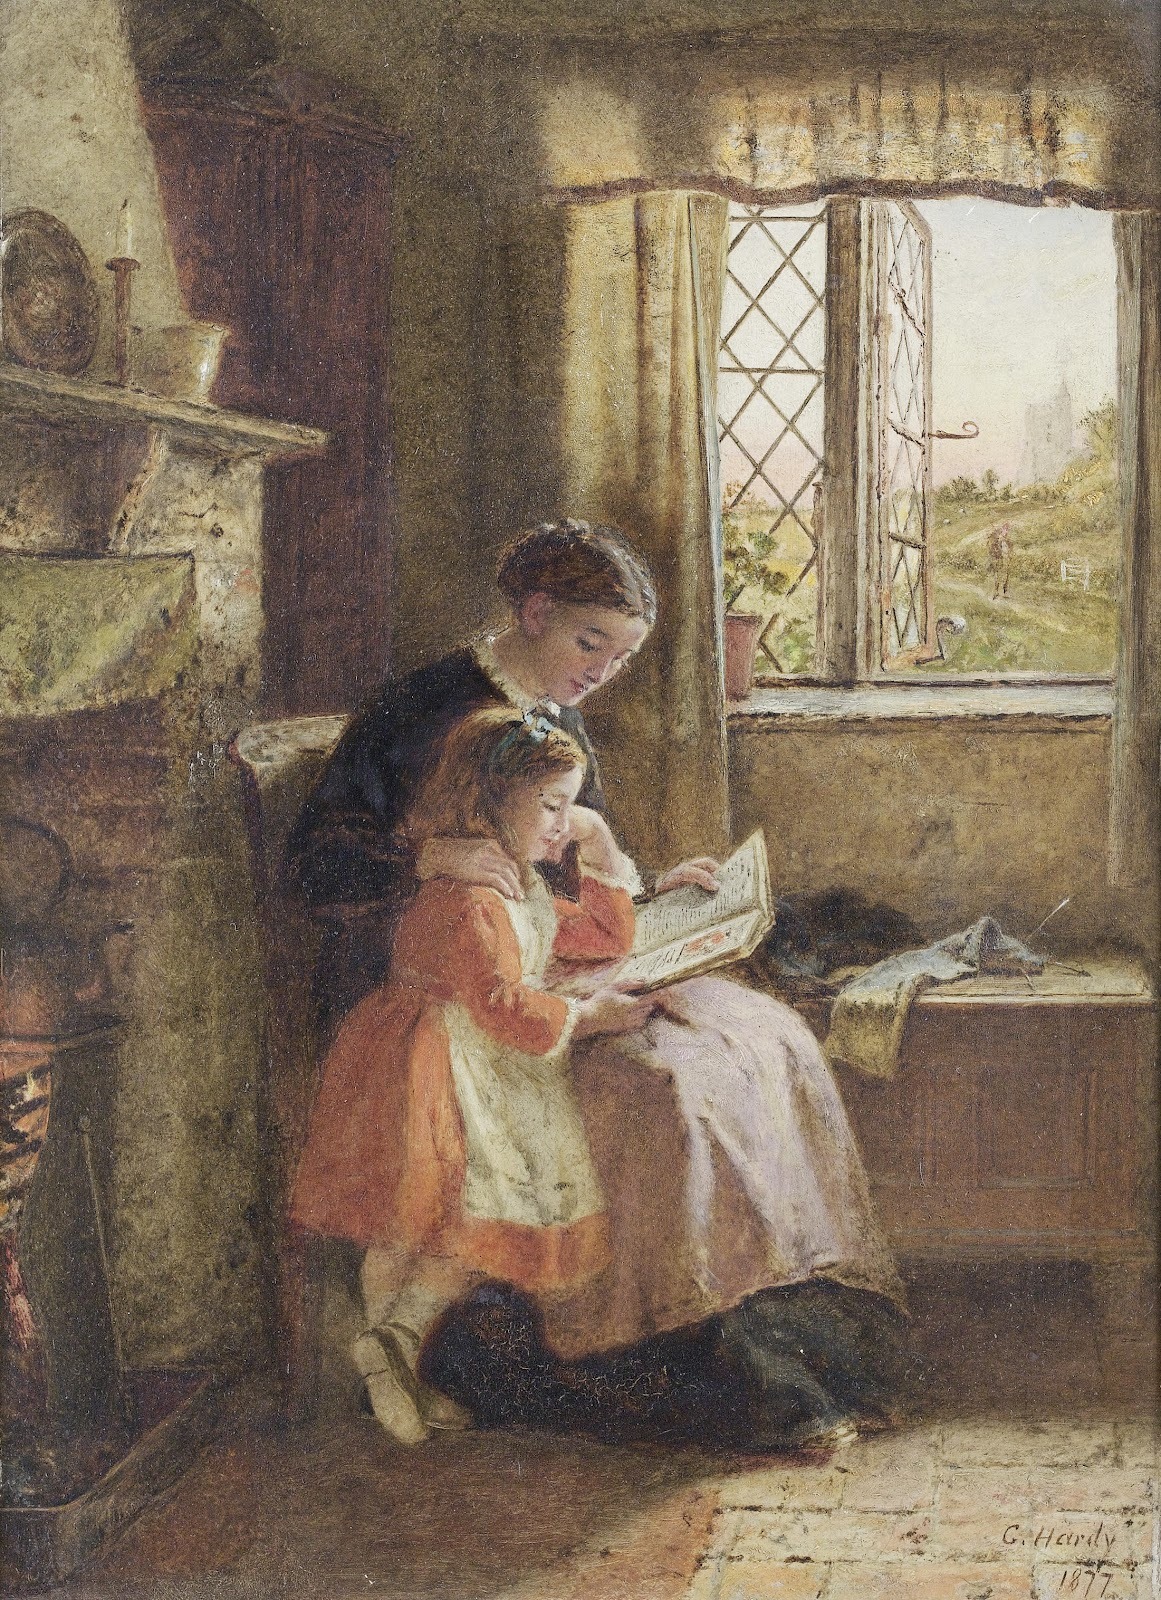 The evening hour (1877). George Hardy (British, 1822-1909). Oil on panel.
Original letter dated 23rd August 1877 attached to the reverse of the panel. The letter is sent from Rose Cottage, Cranbrook to William Evans Esq. and reads ‘My dear Sir/I beg...